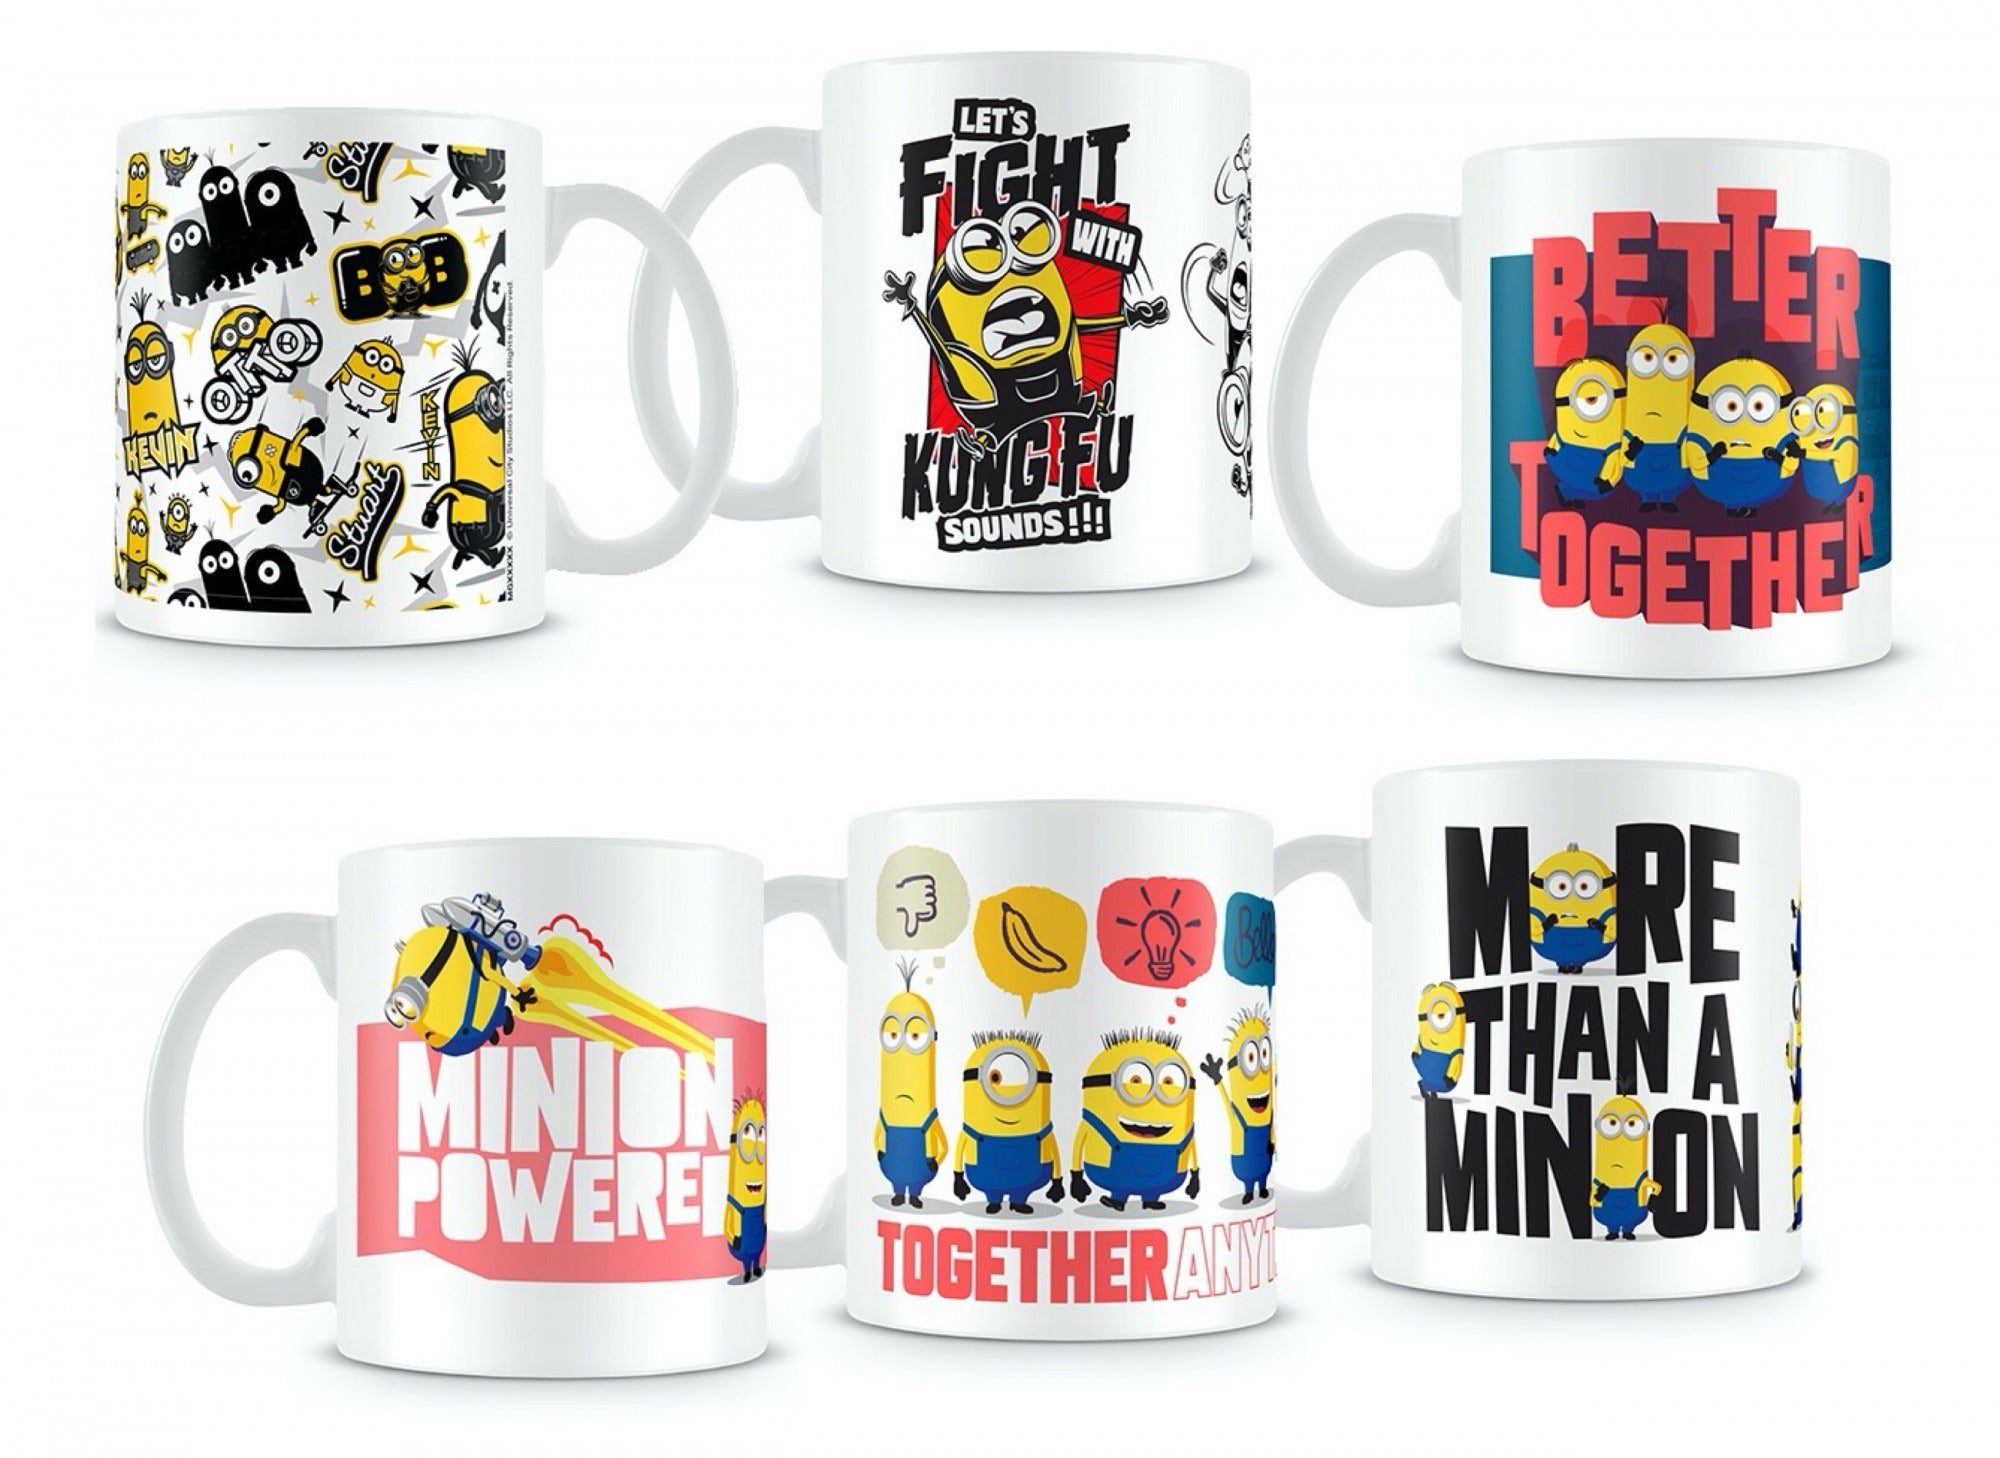 View Minions 2 Mug 6 Assorted Designs includes box information